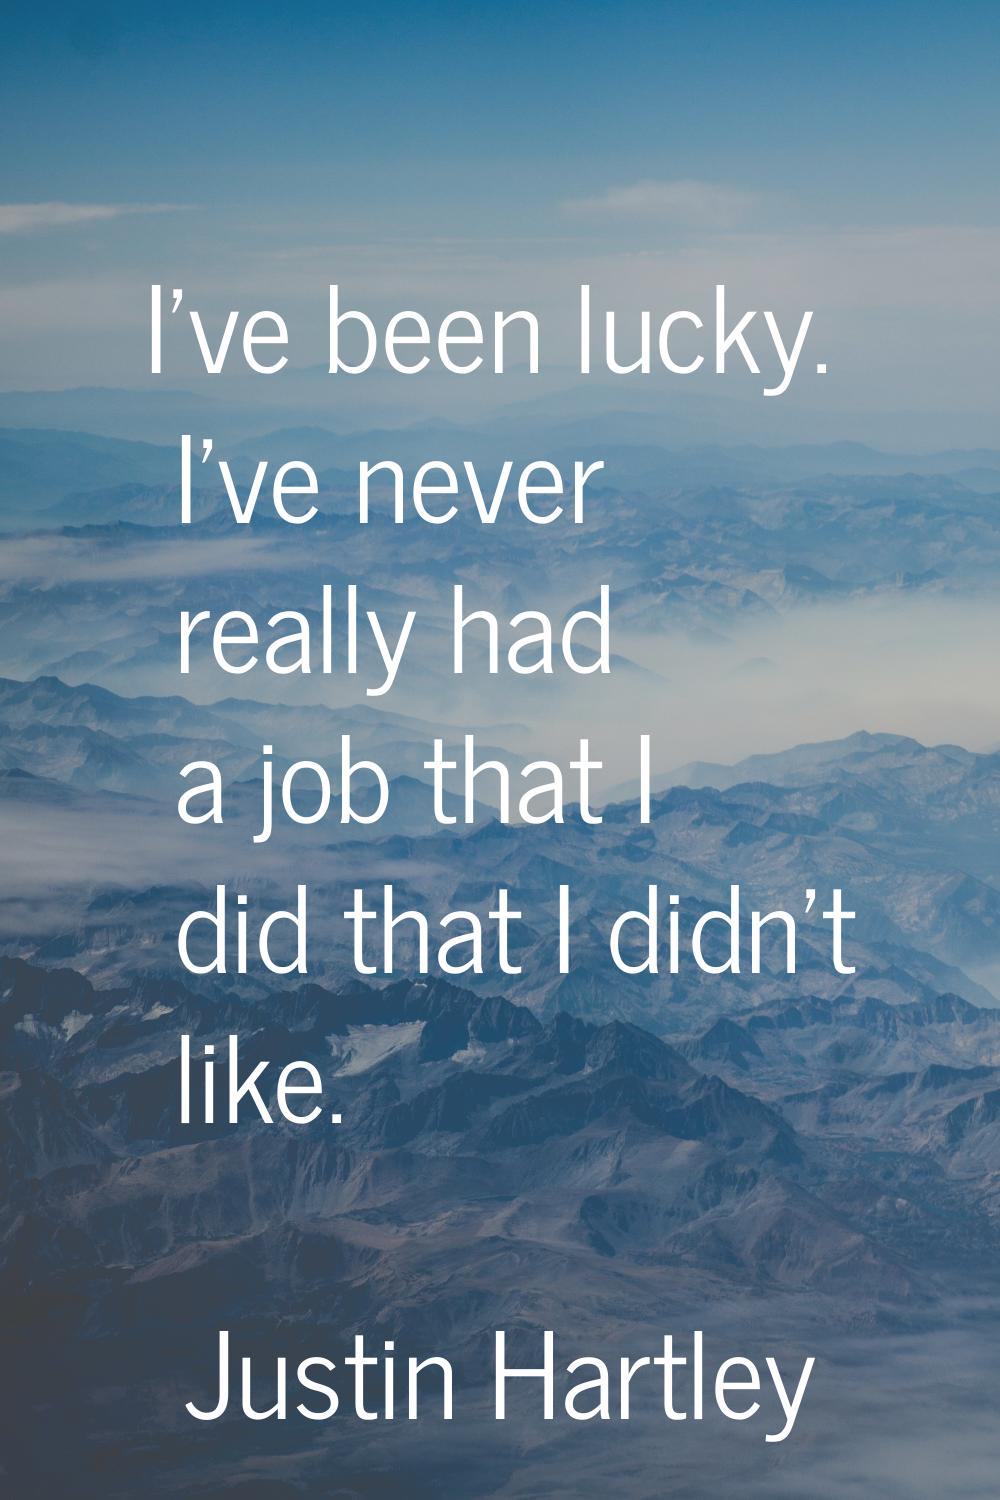 I've been lucky. I've never really had a job that I did that I didn't like.